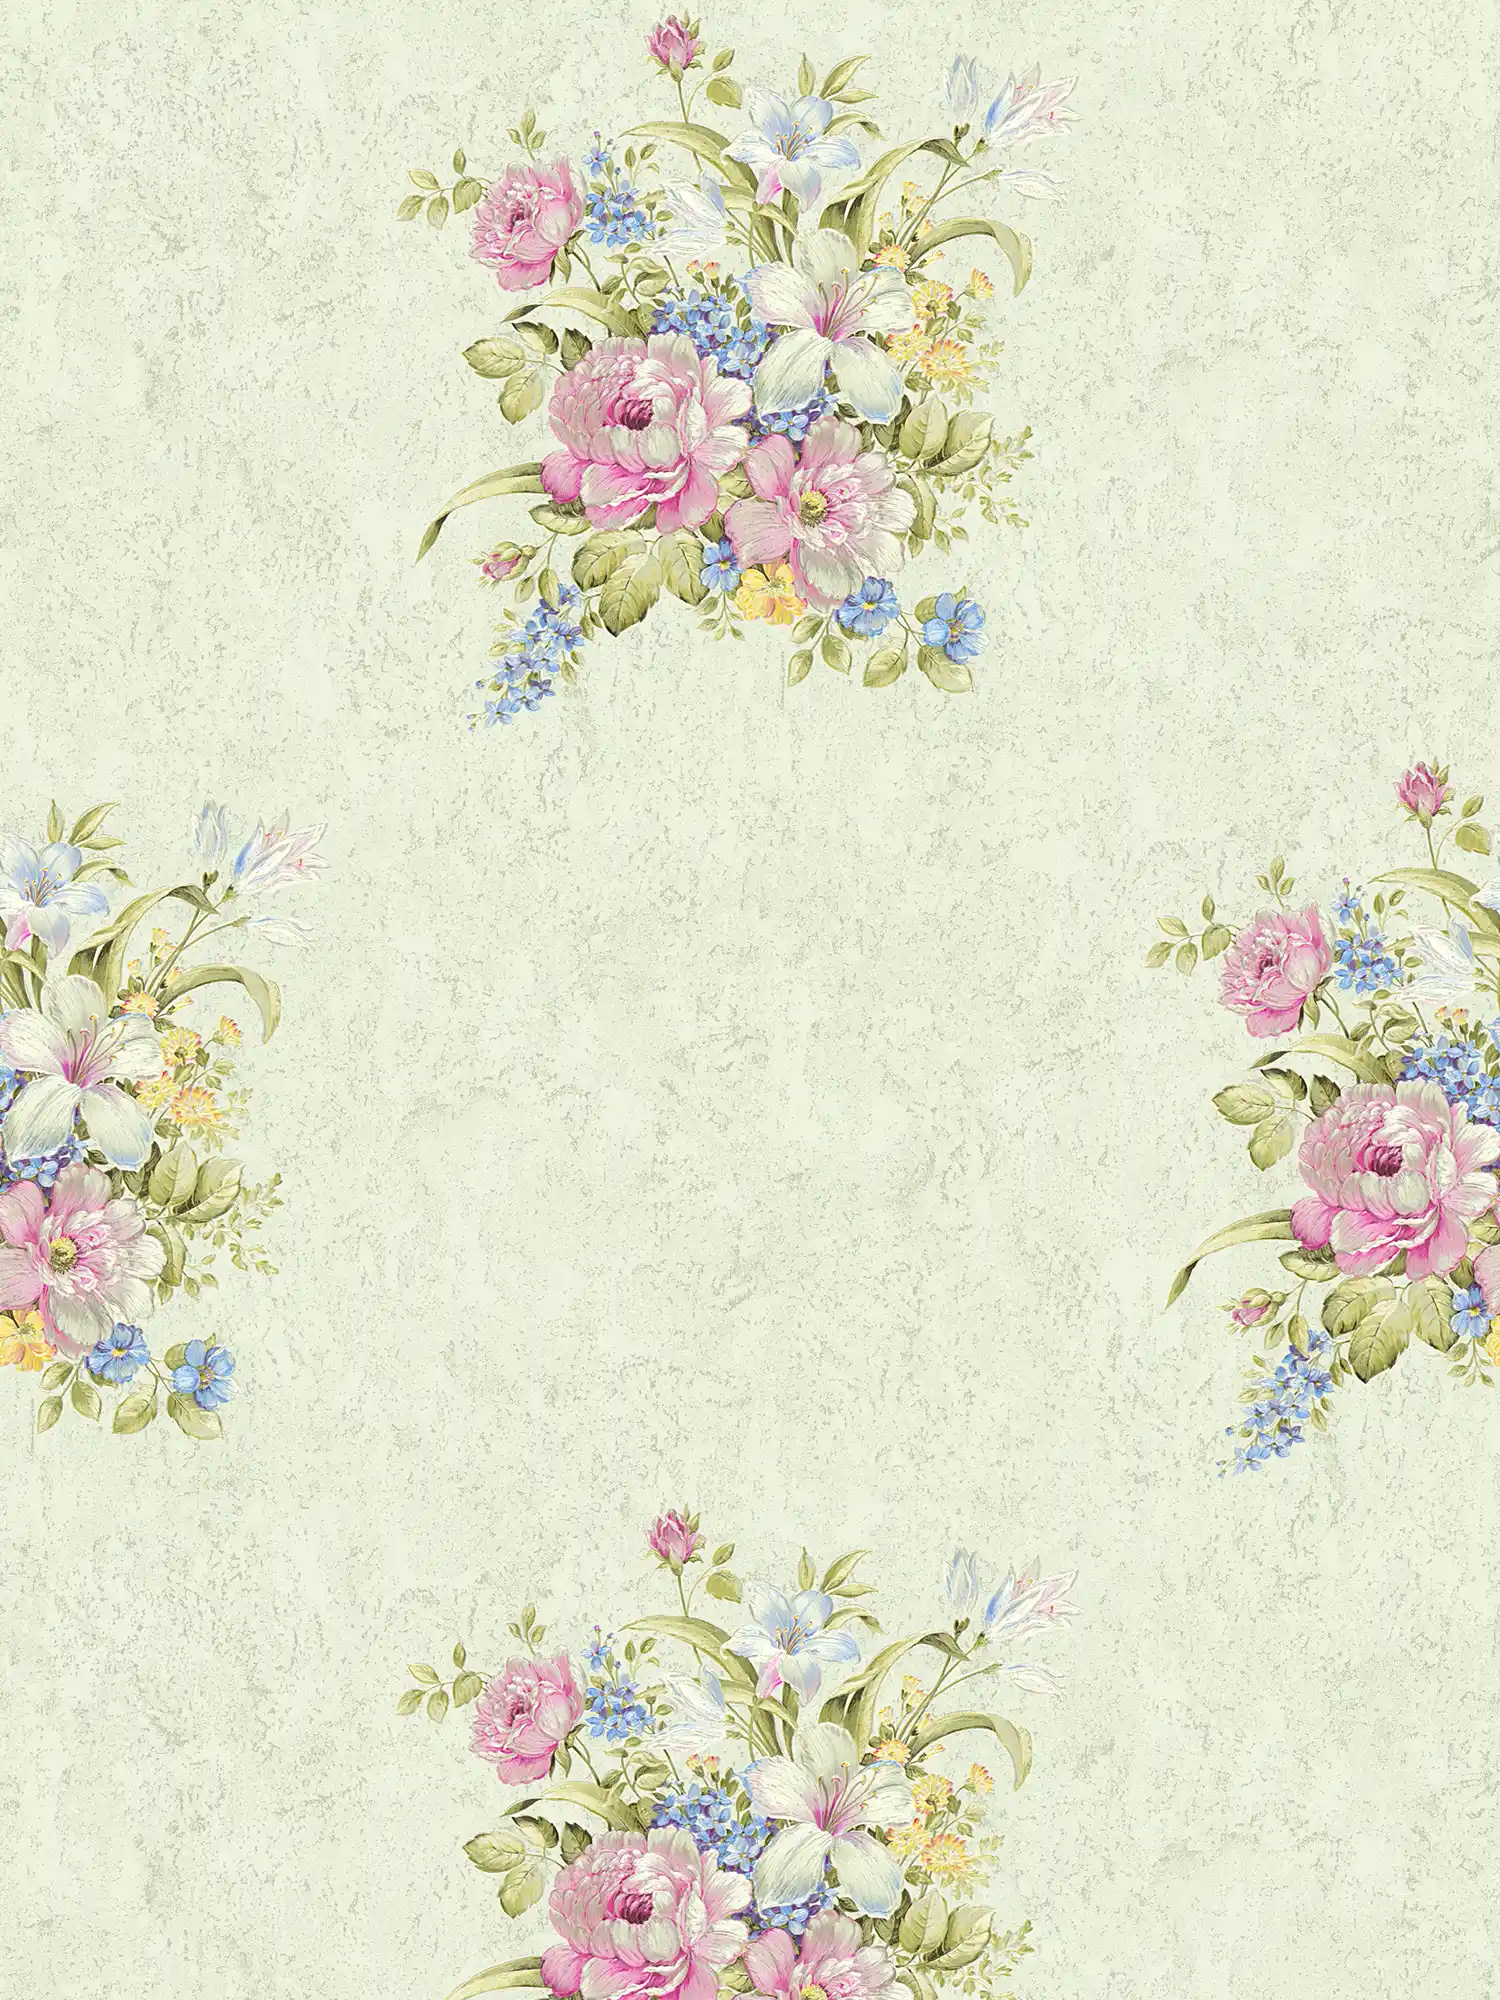 Flowers wallpaper with ornaments, textured - green, pink
